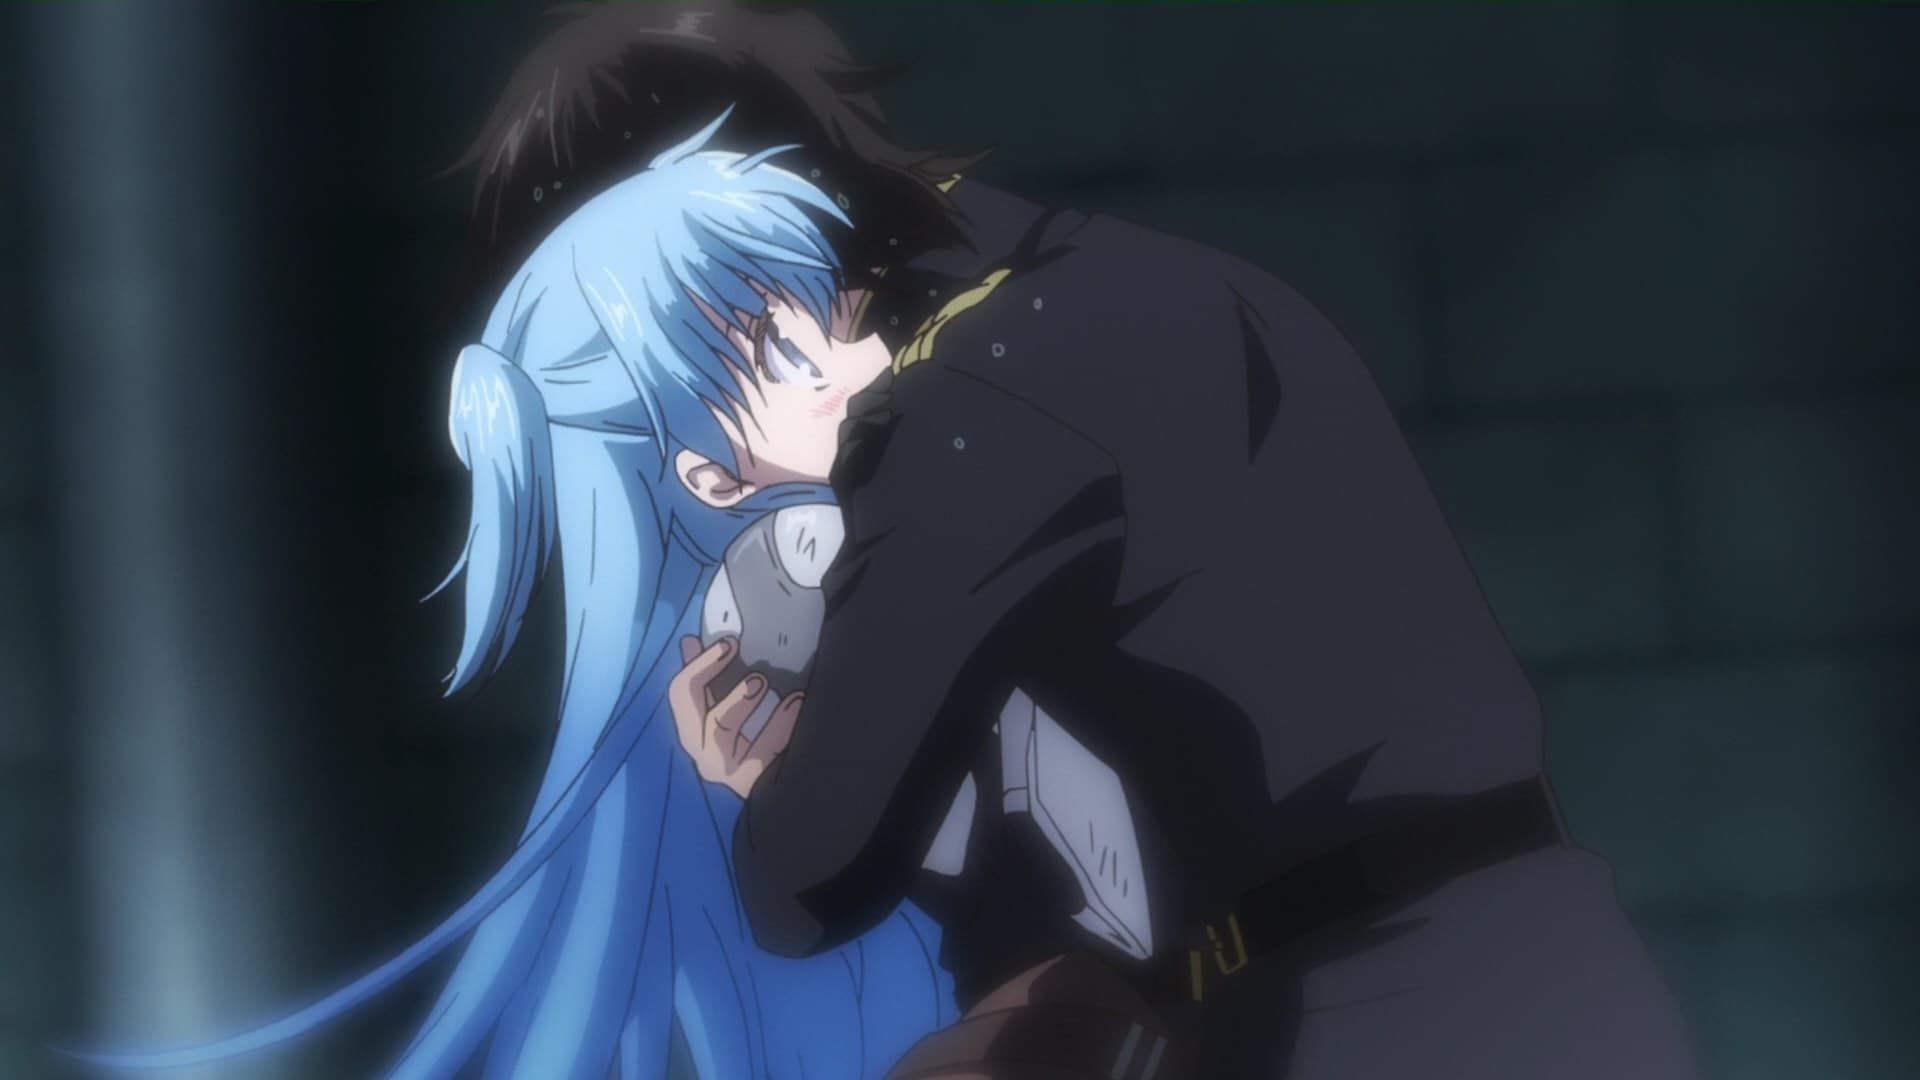 Watch WorldEnd: What do you do at the end of the world? Are you